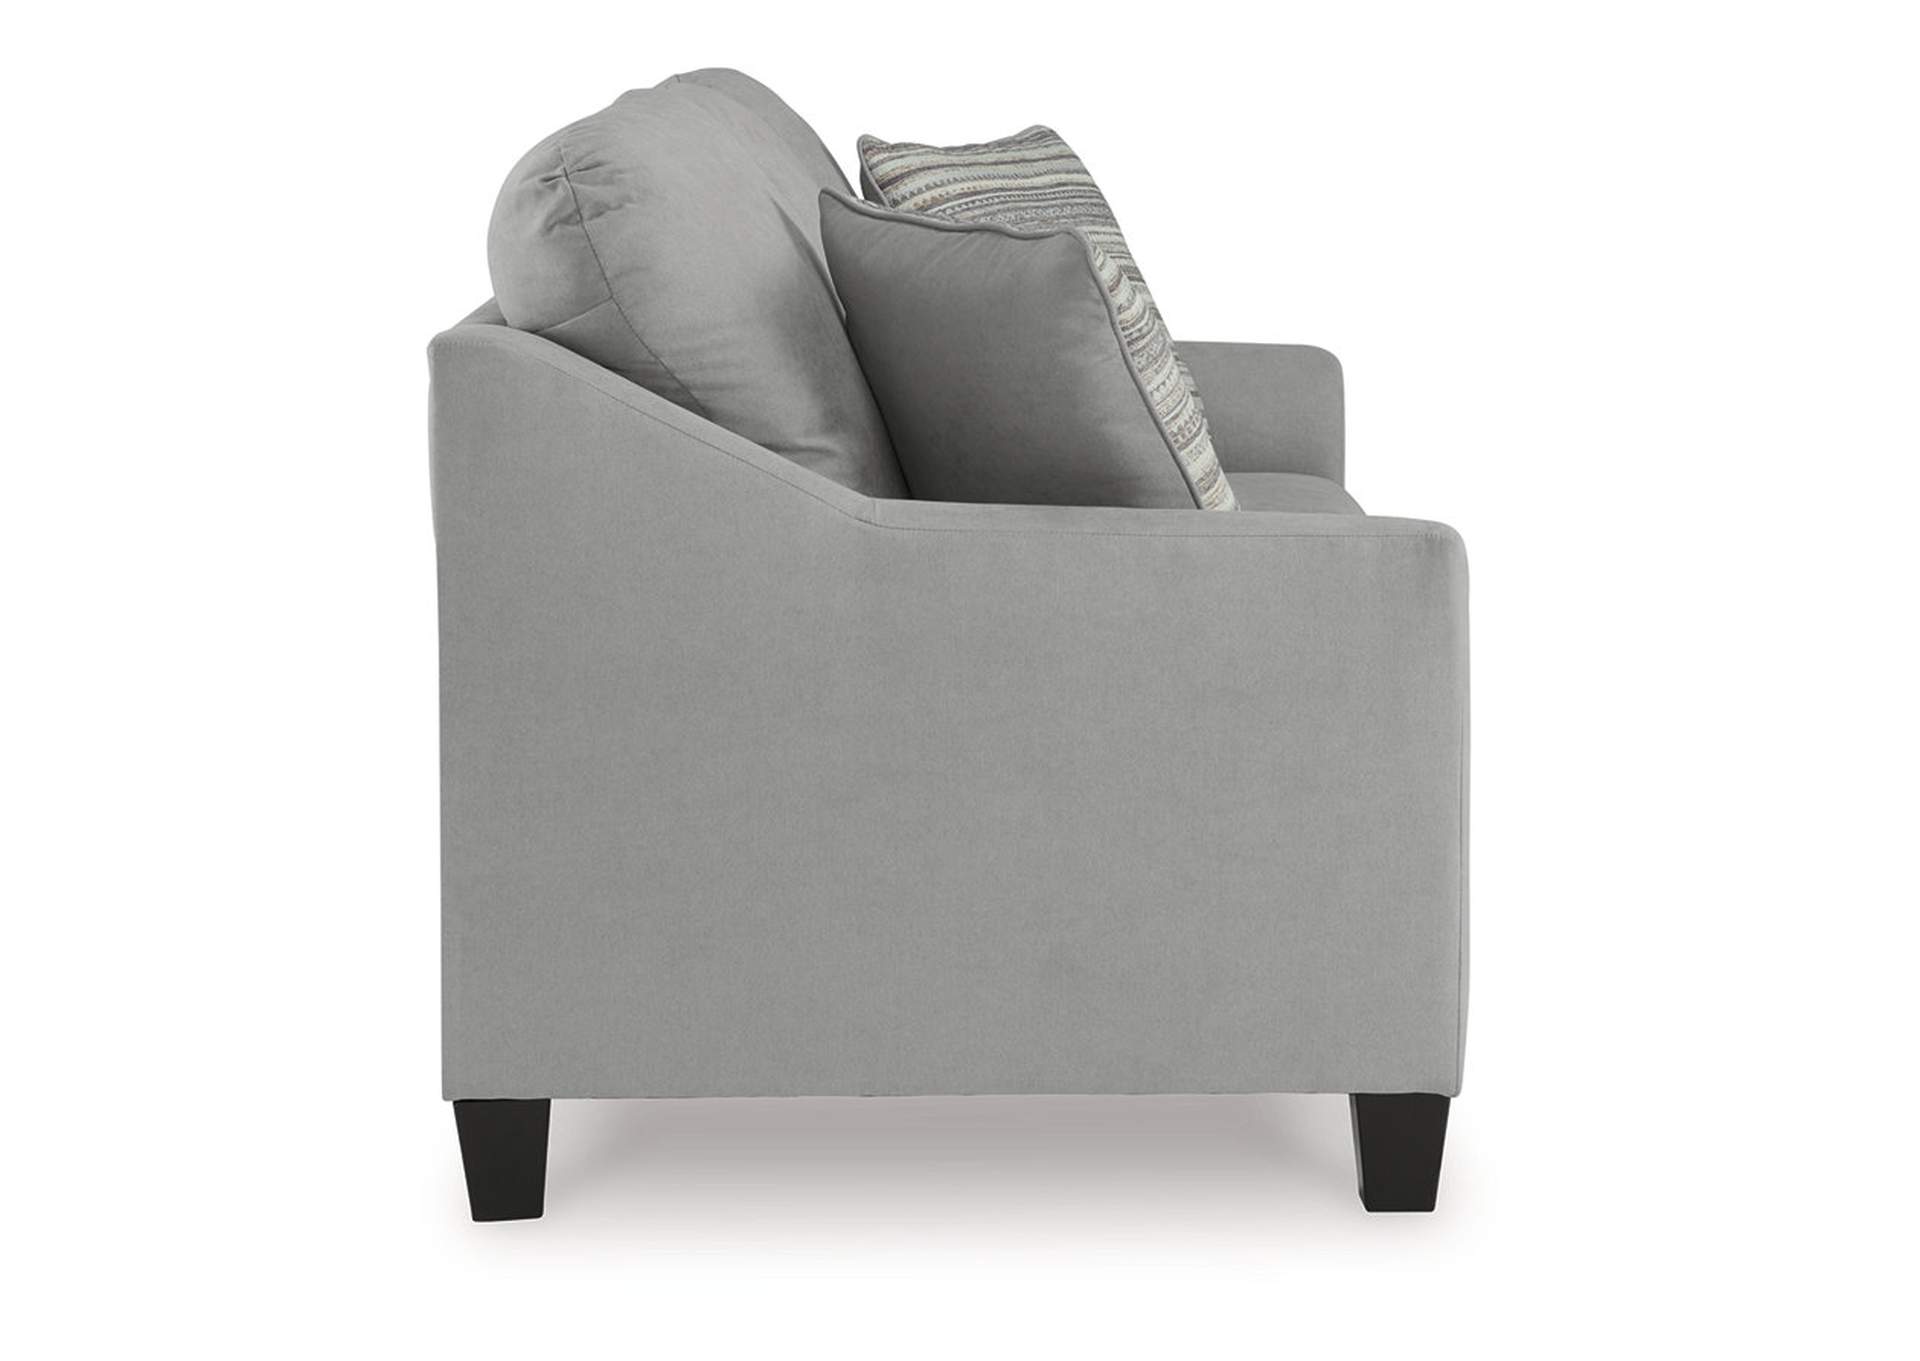 Adlai Sofa, Loveseat, Chair and Ottoman,Signature Design By Ashley